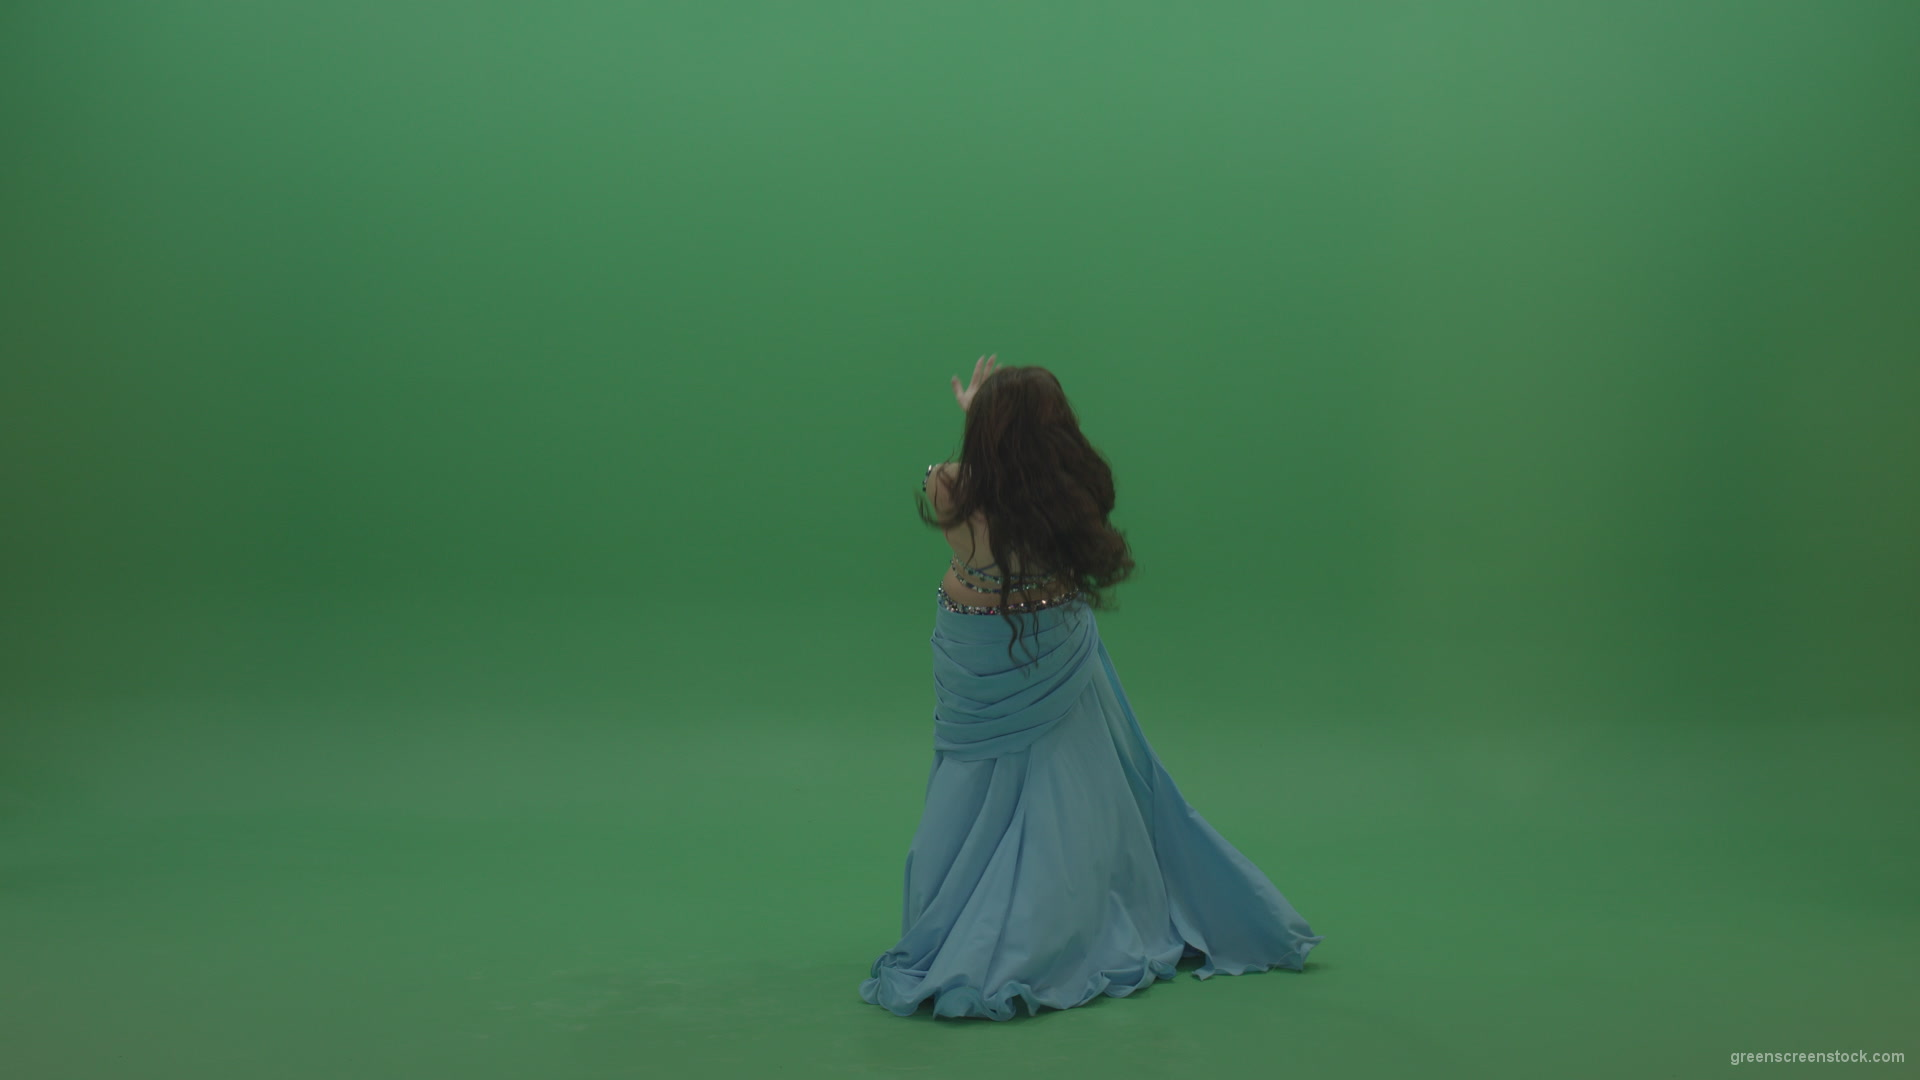 Fair-belly-dancer-in-blue-wear-display-amazing-dance-moves-over-chromakey-background_007 Green Screen Stock